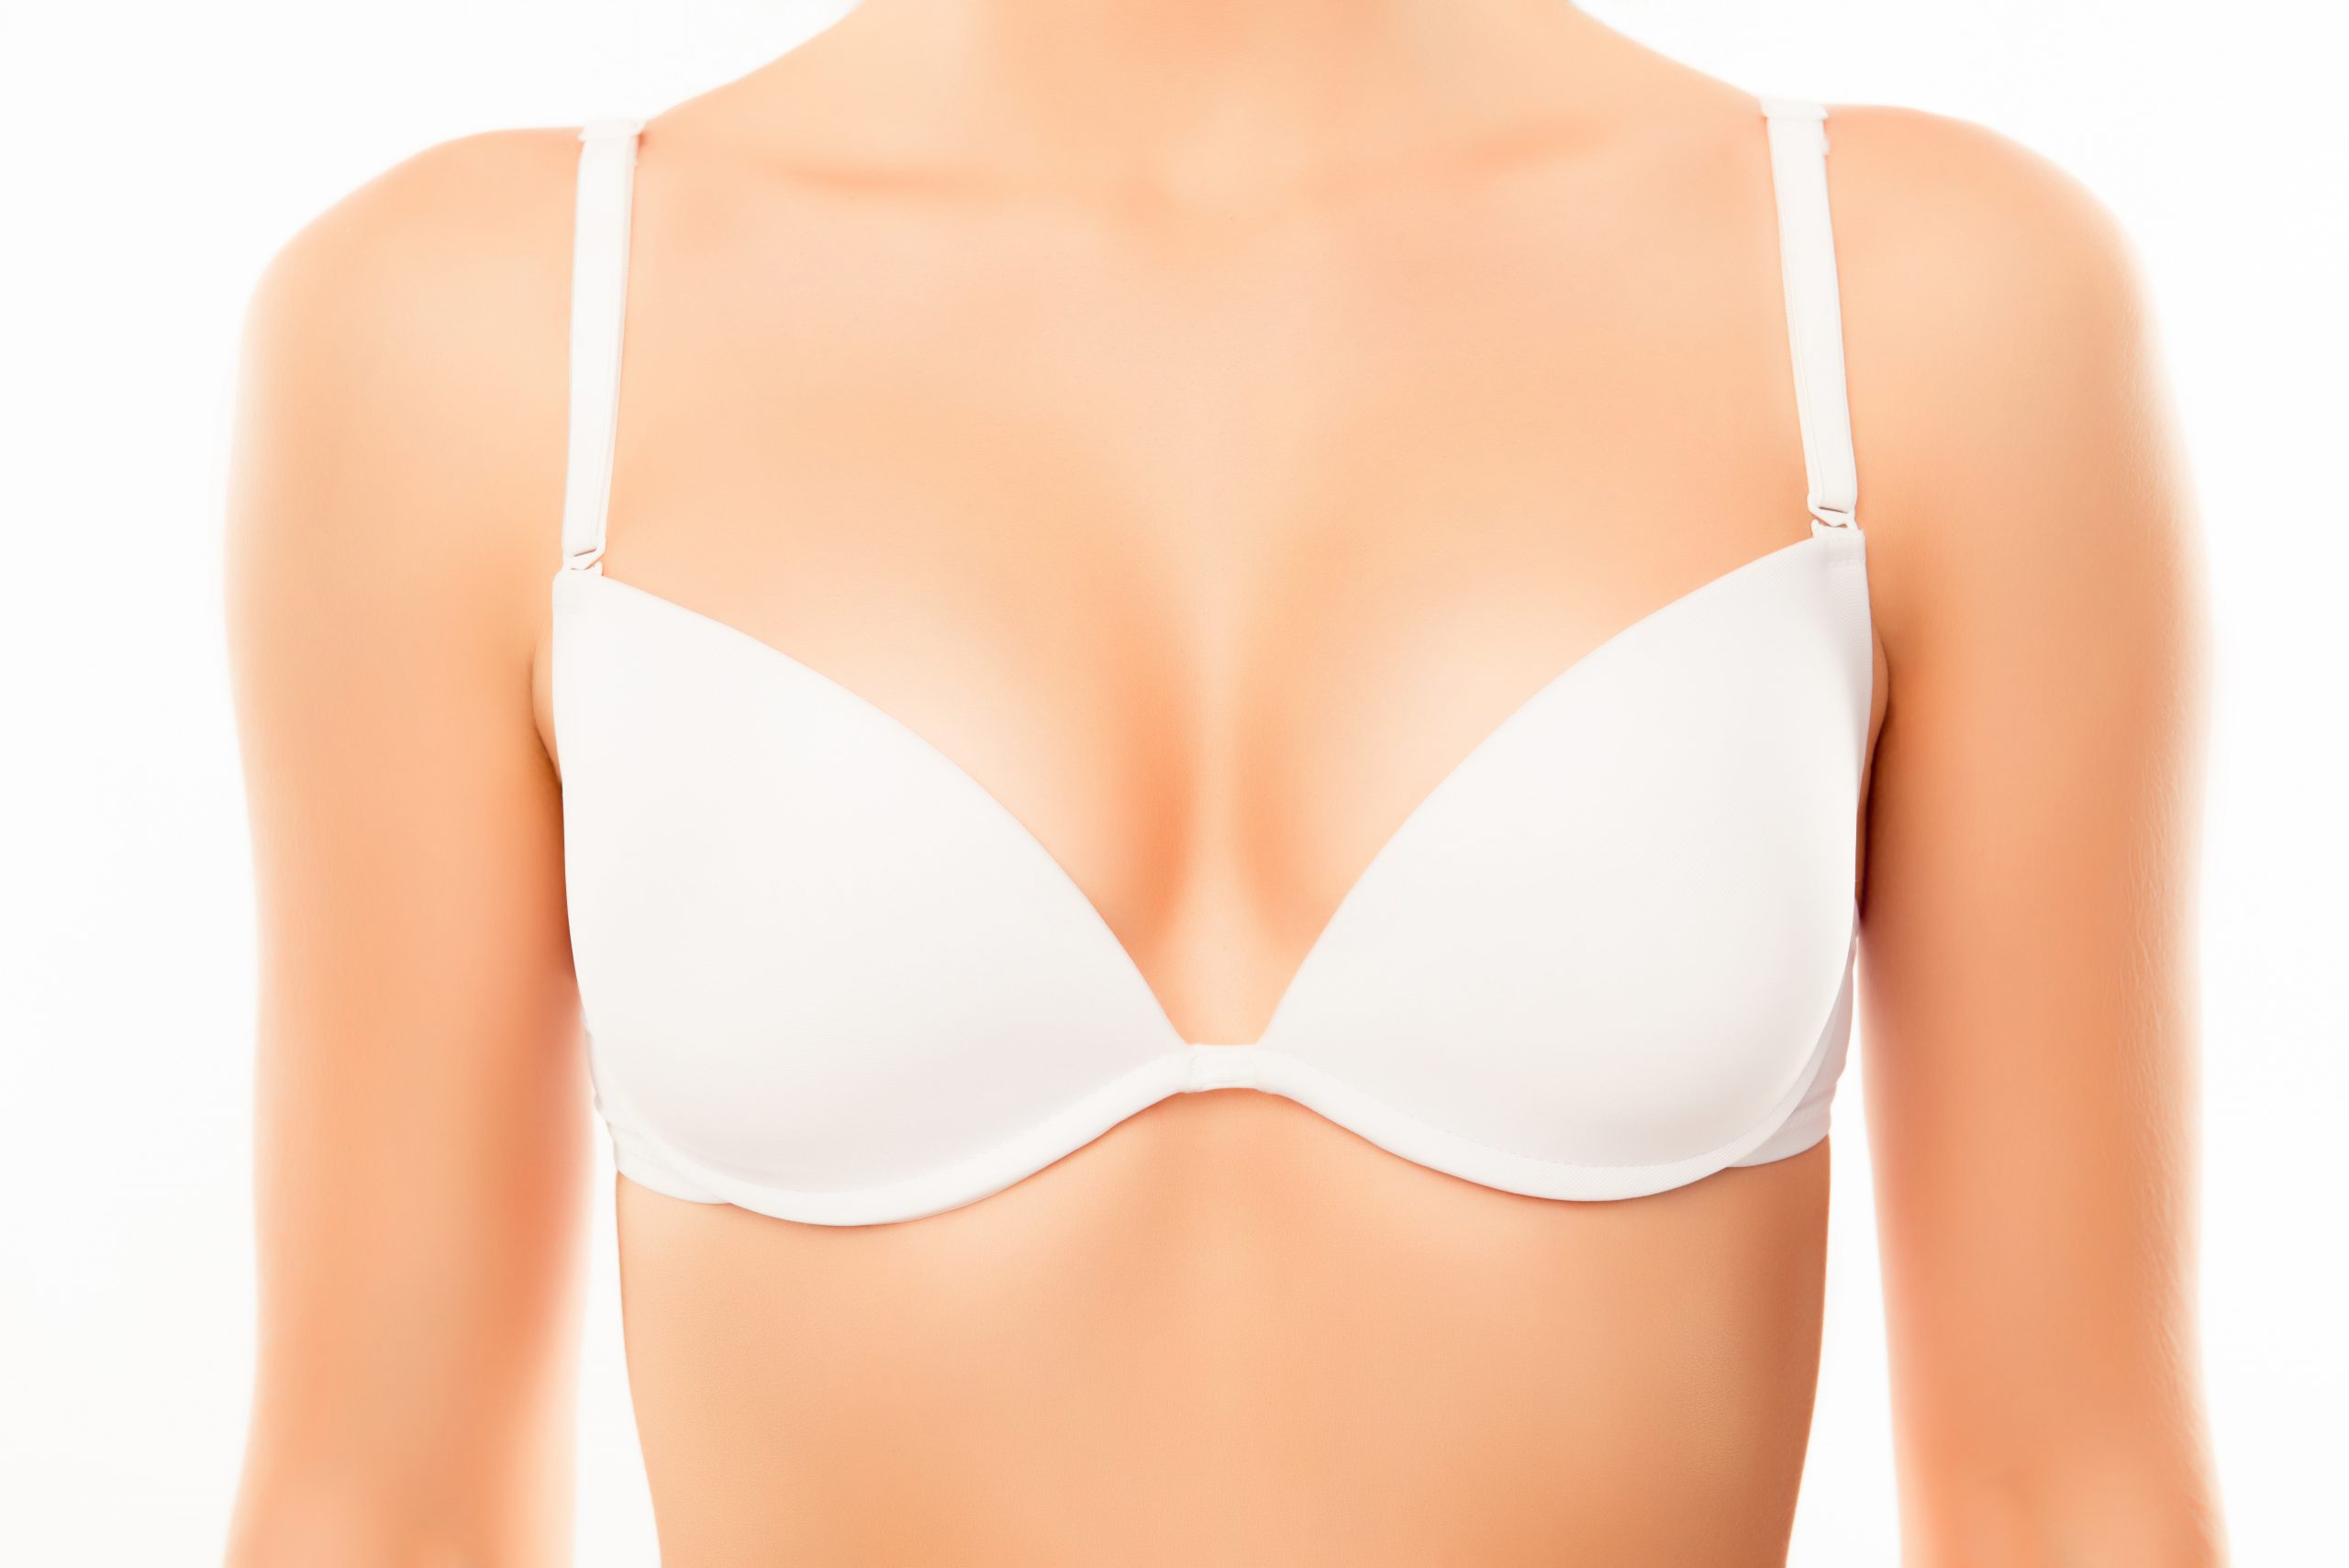 Can Breast Augmentation Fix Saggy Breasts? - Criswell & Criswell